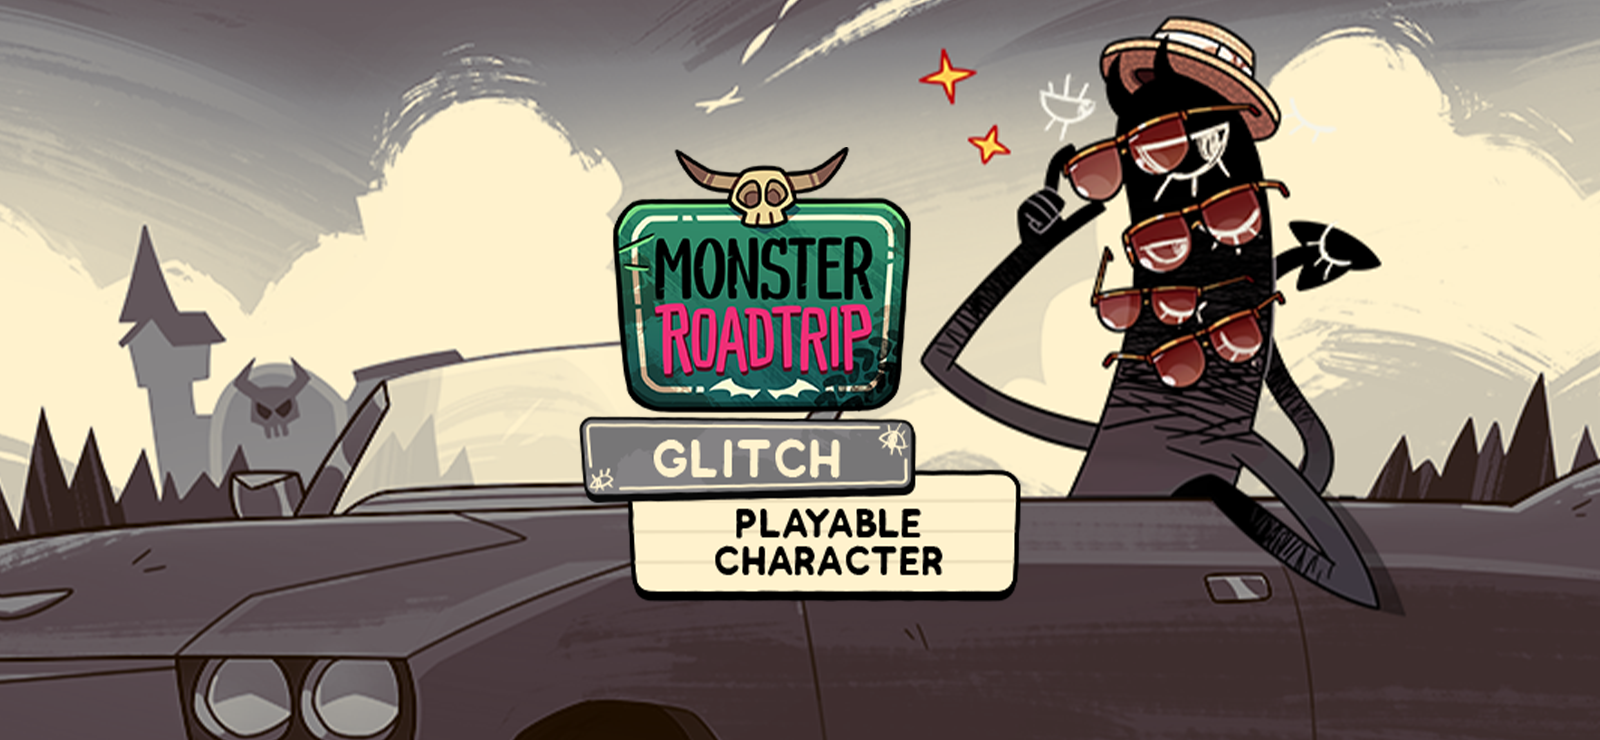 Monster Roadtrip - Playable Character - Glitch